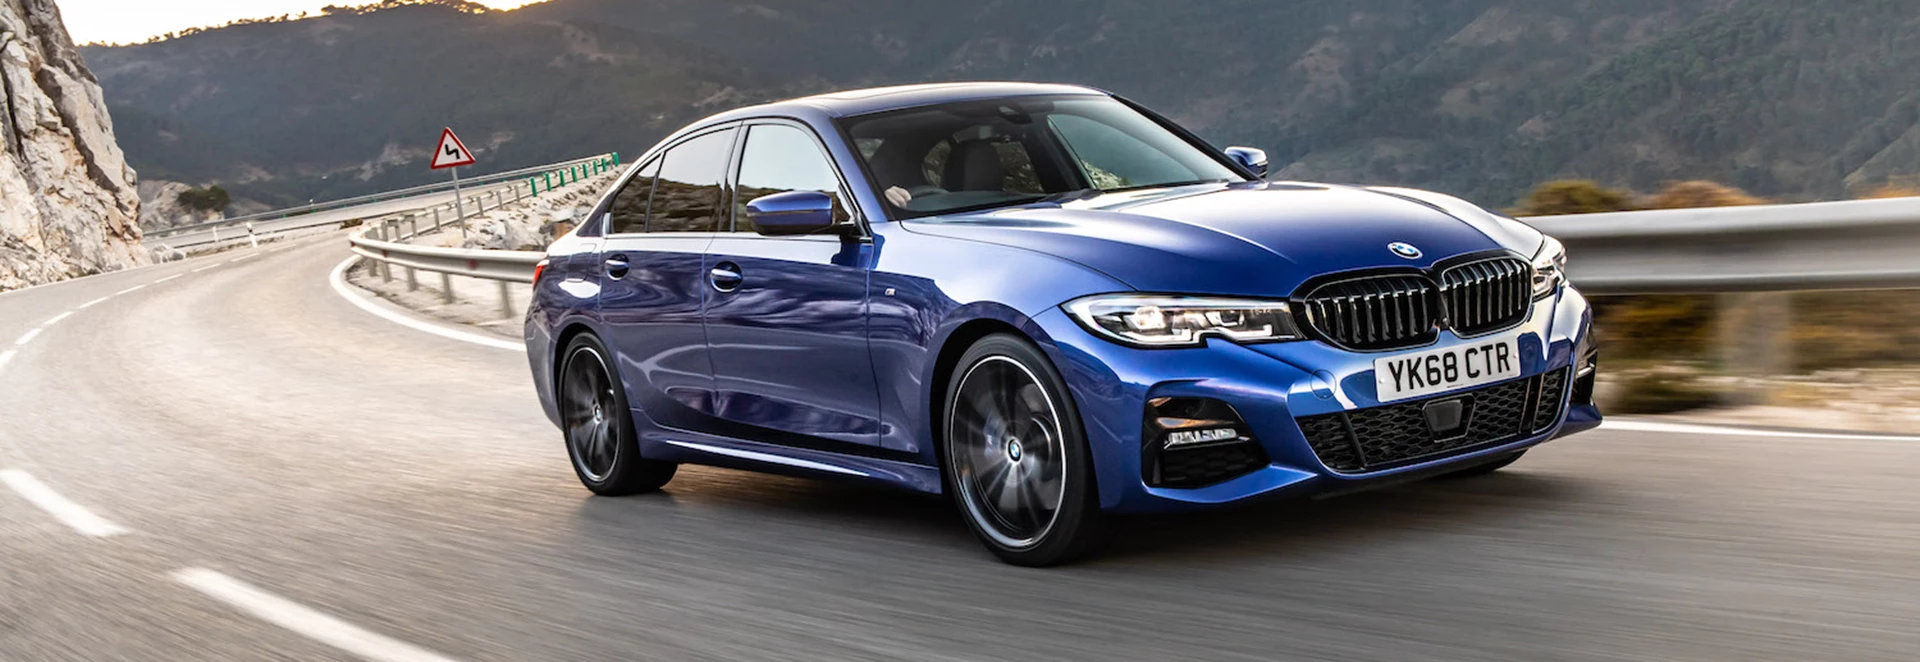 What the BMW 3 series has against rivals